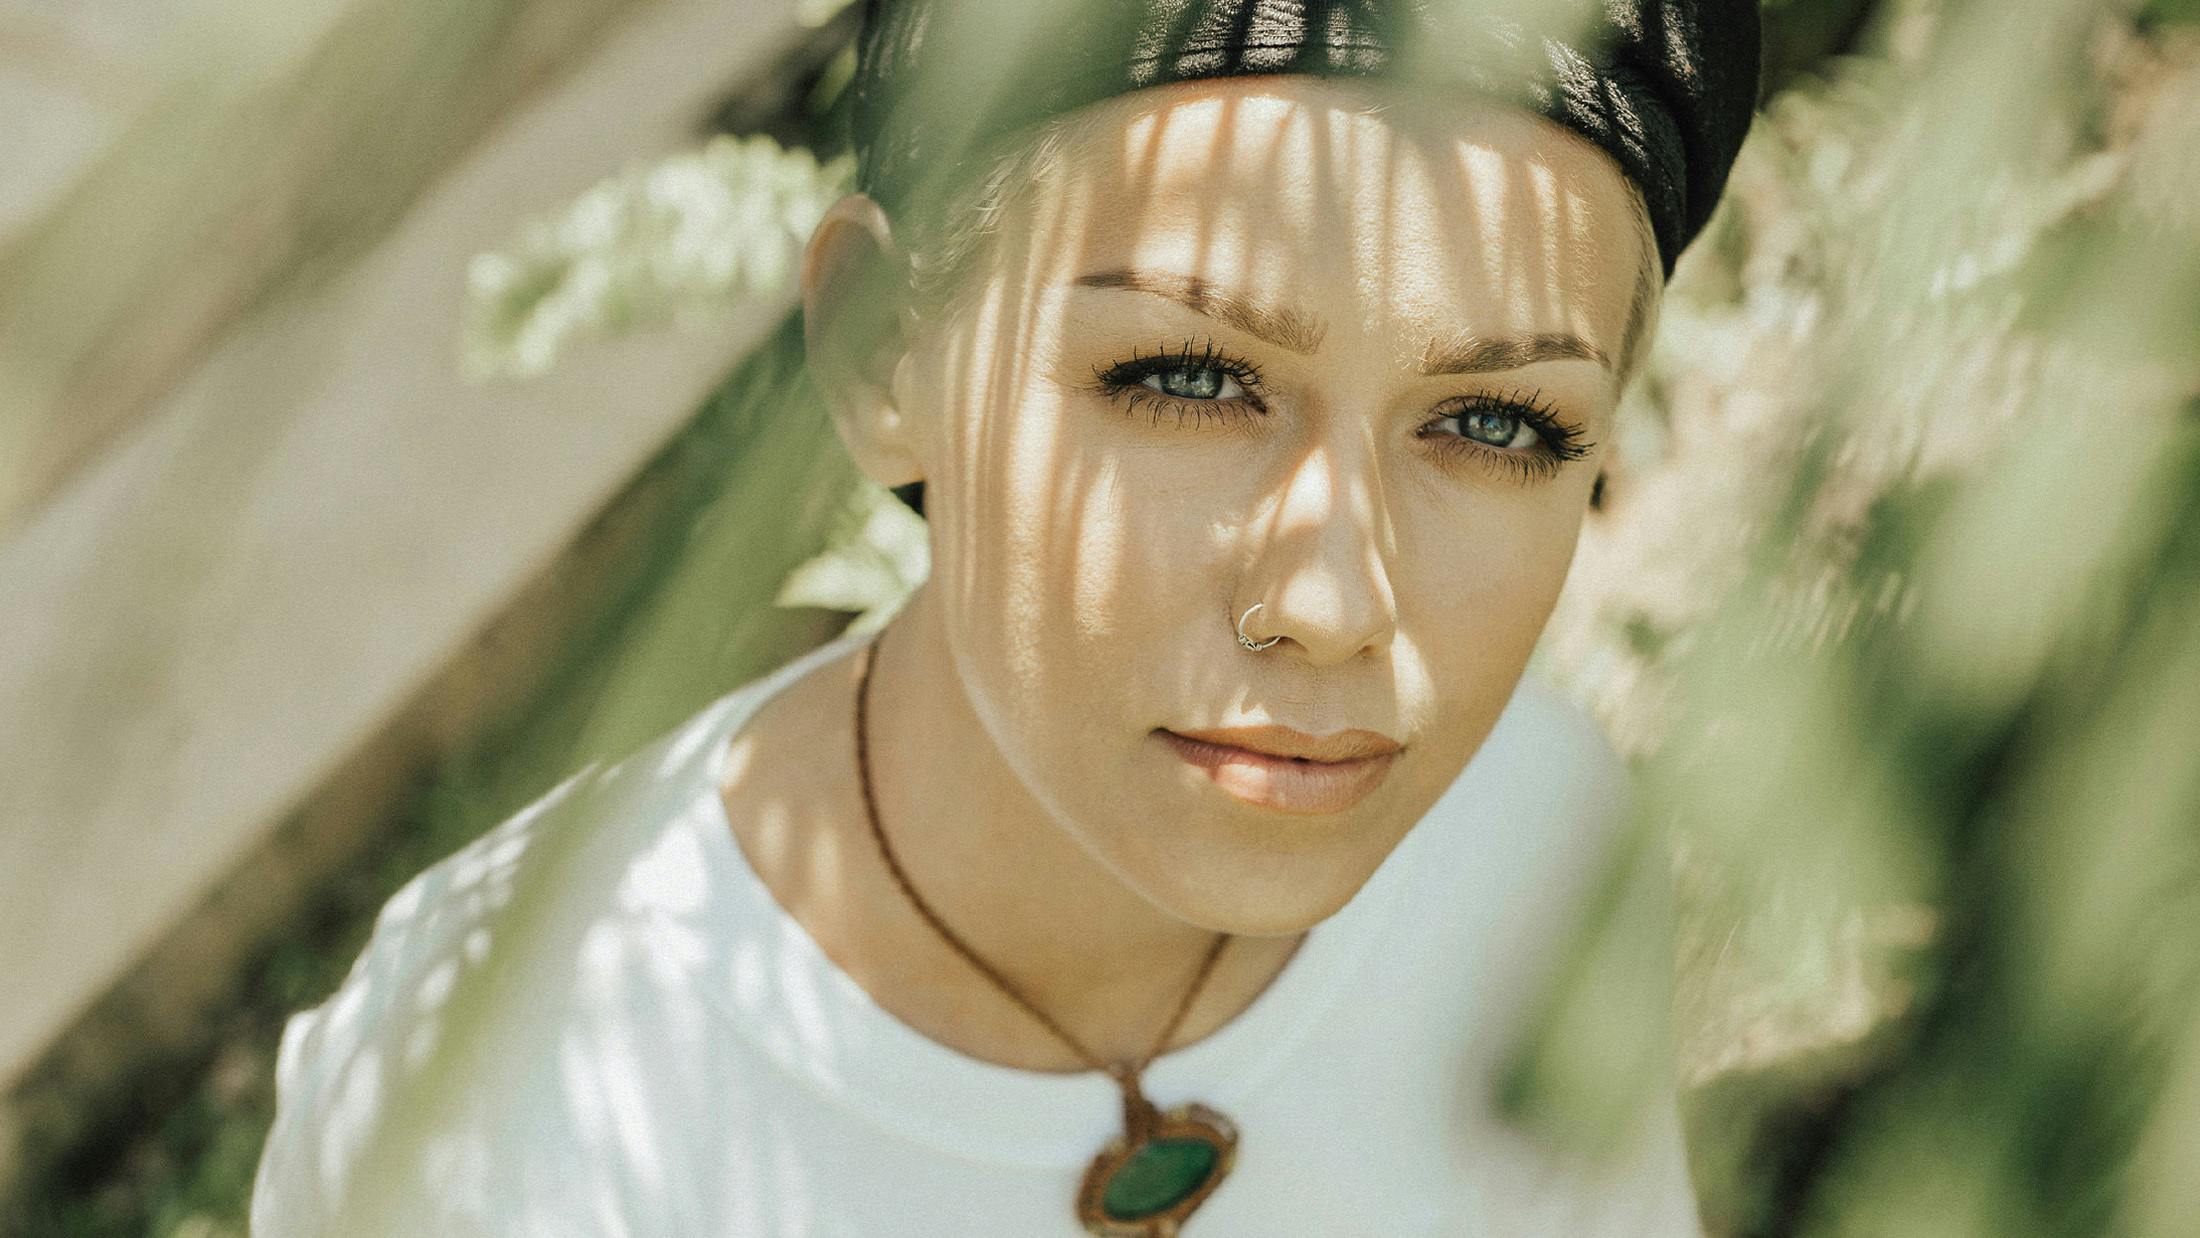 Tonight Alive's Jenna McDougall: The 10 Songs That Changed My Life